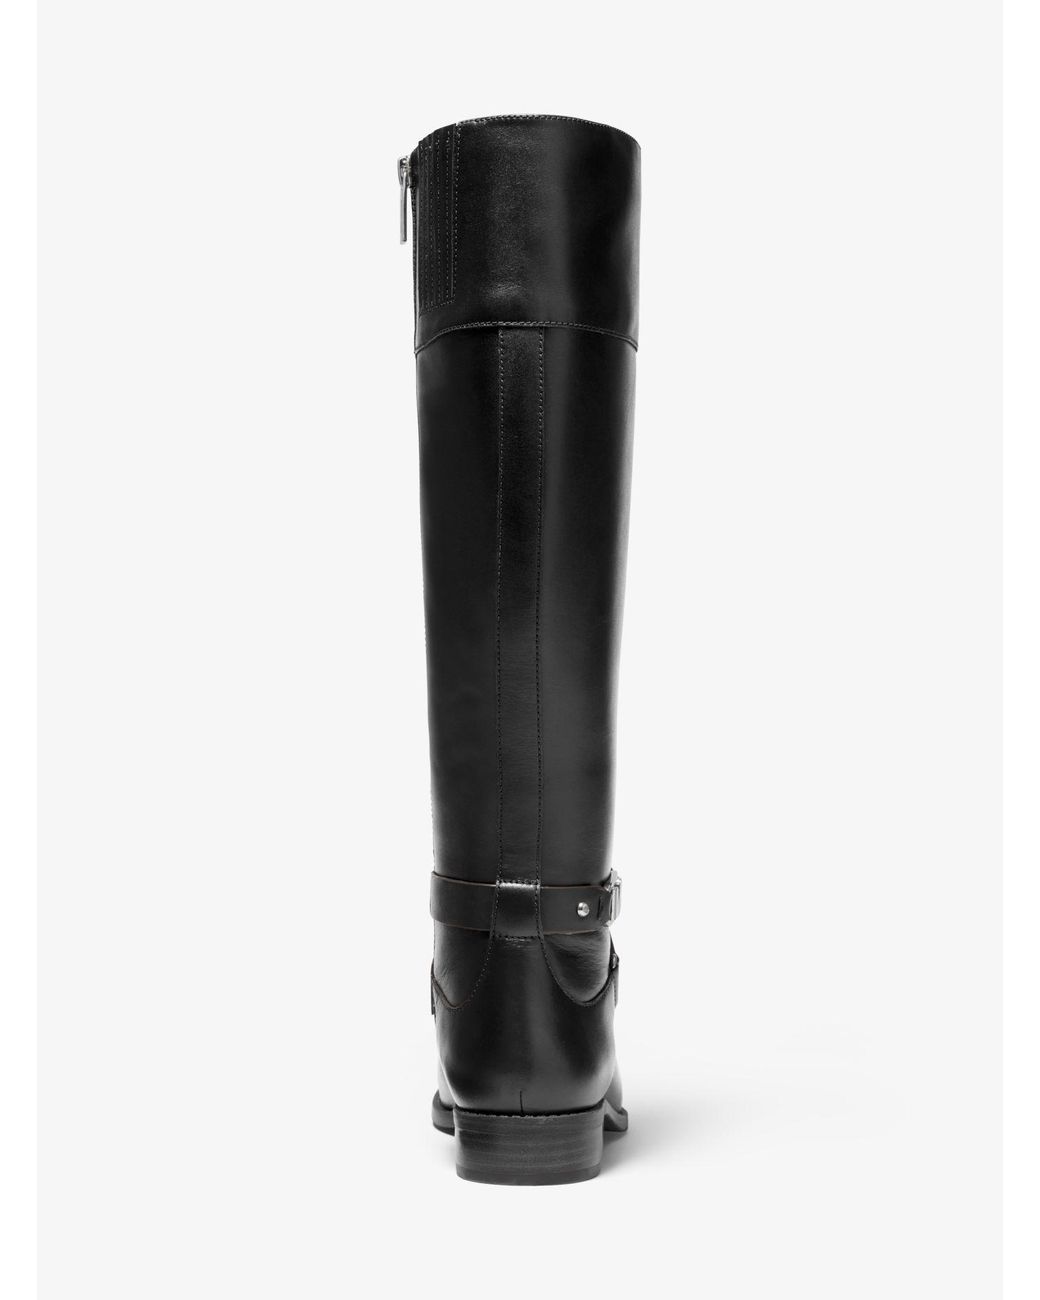 michael kors knee high leather boots